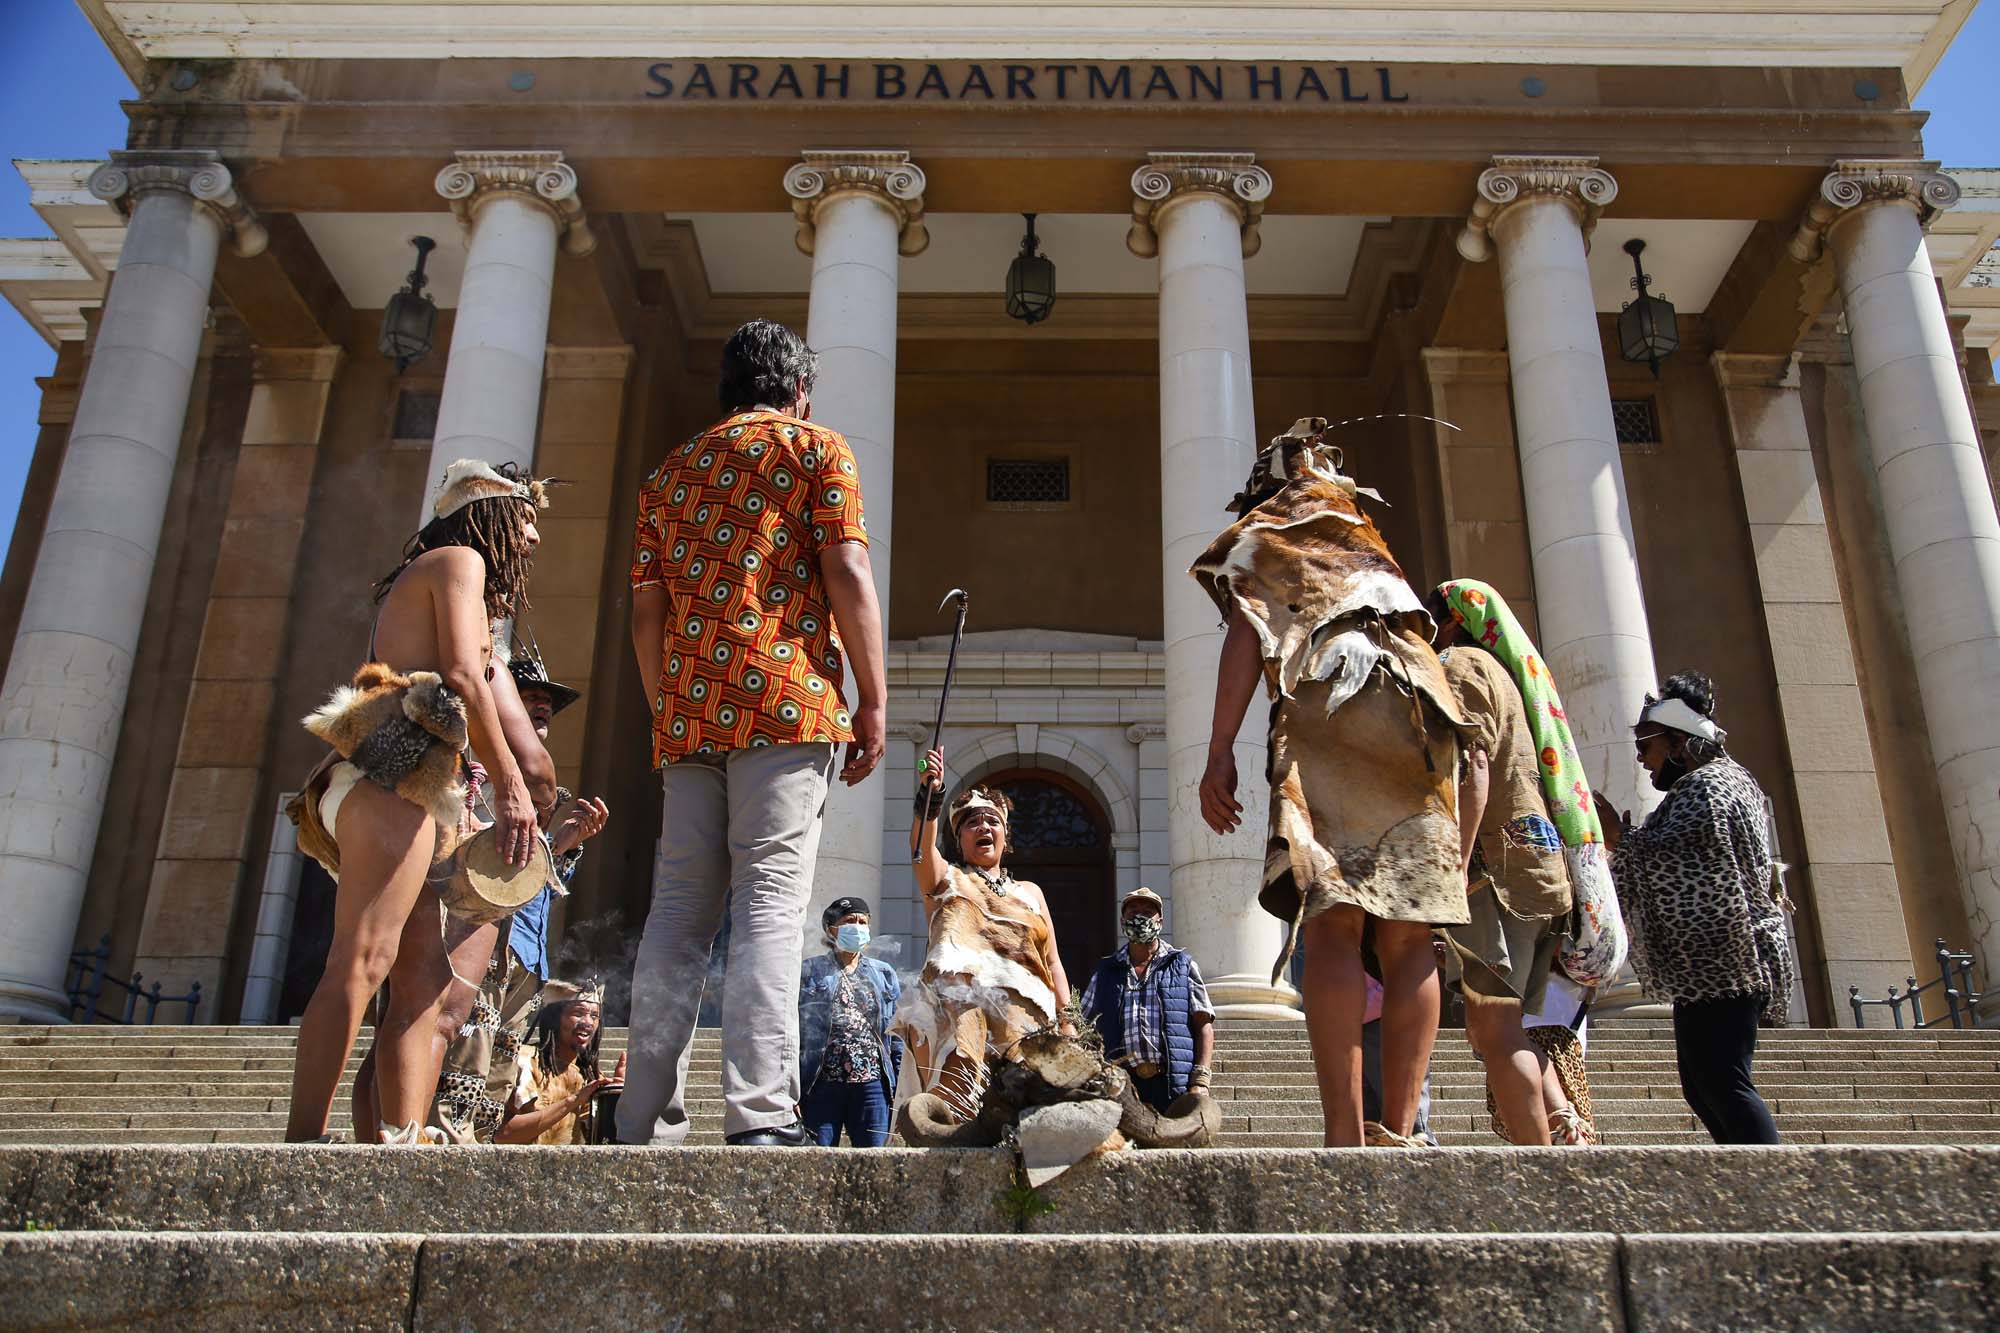 UCT Cleansing Ceremony and Acknowledgement of Land took place on middle and upper campus on 9 September 2021.